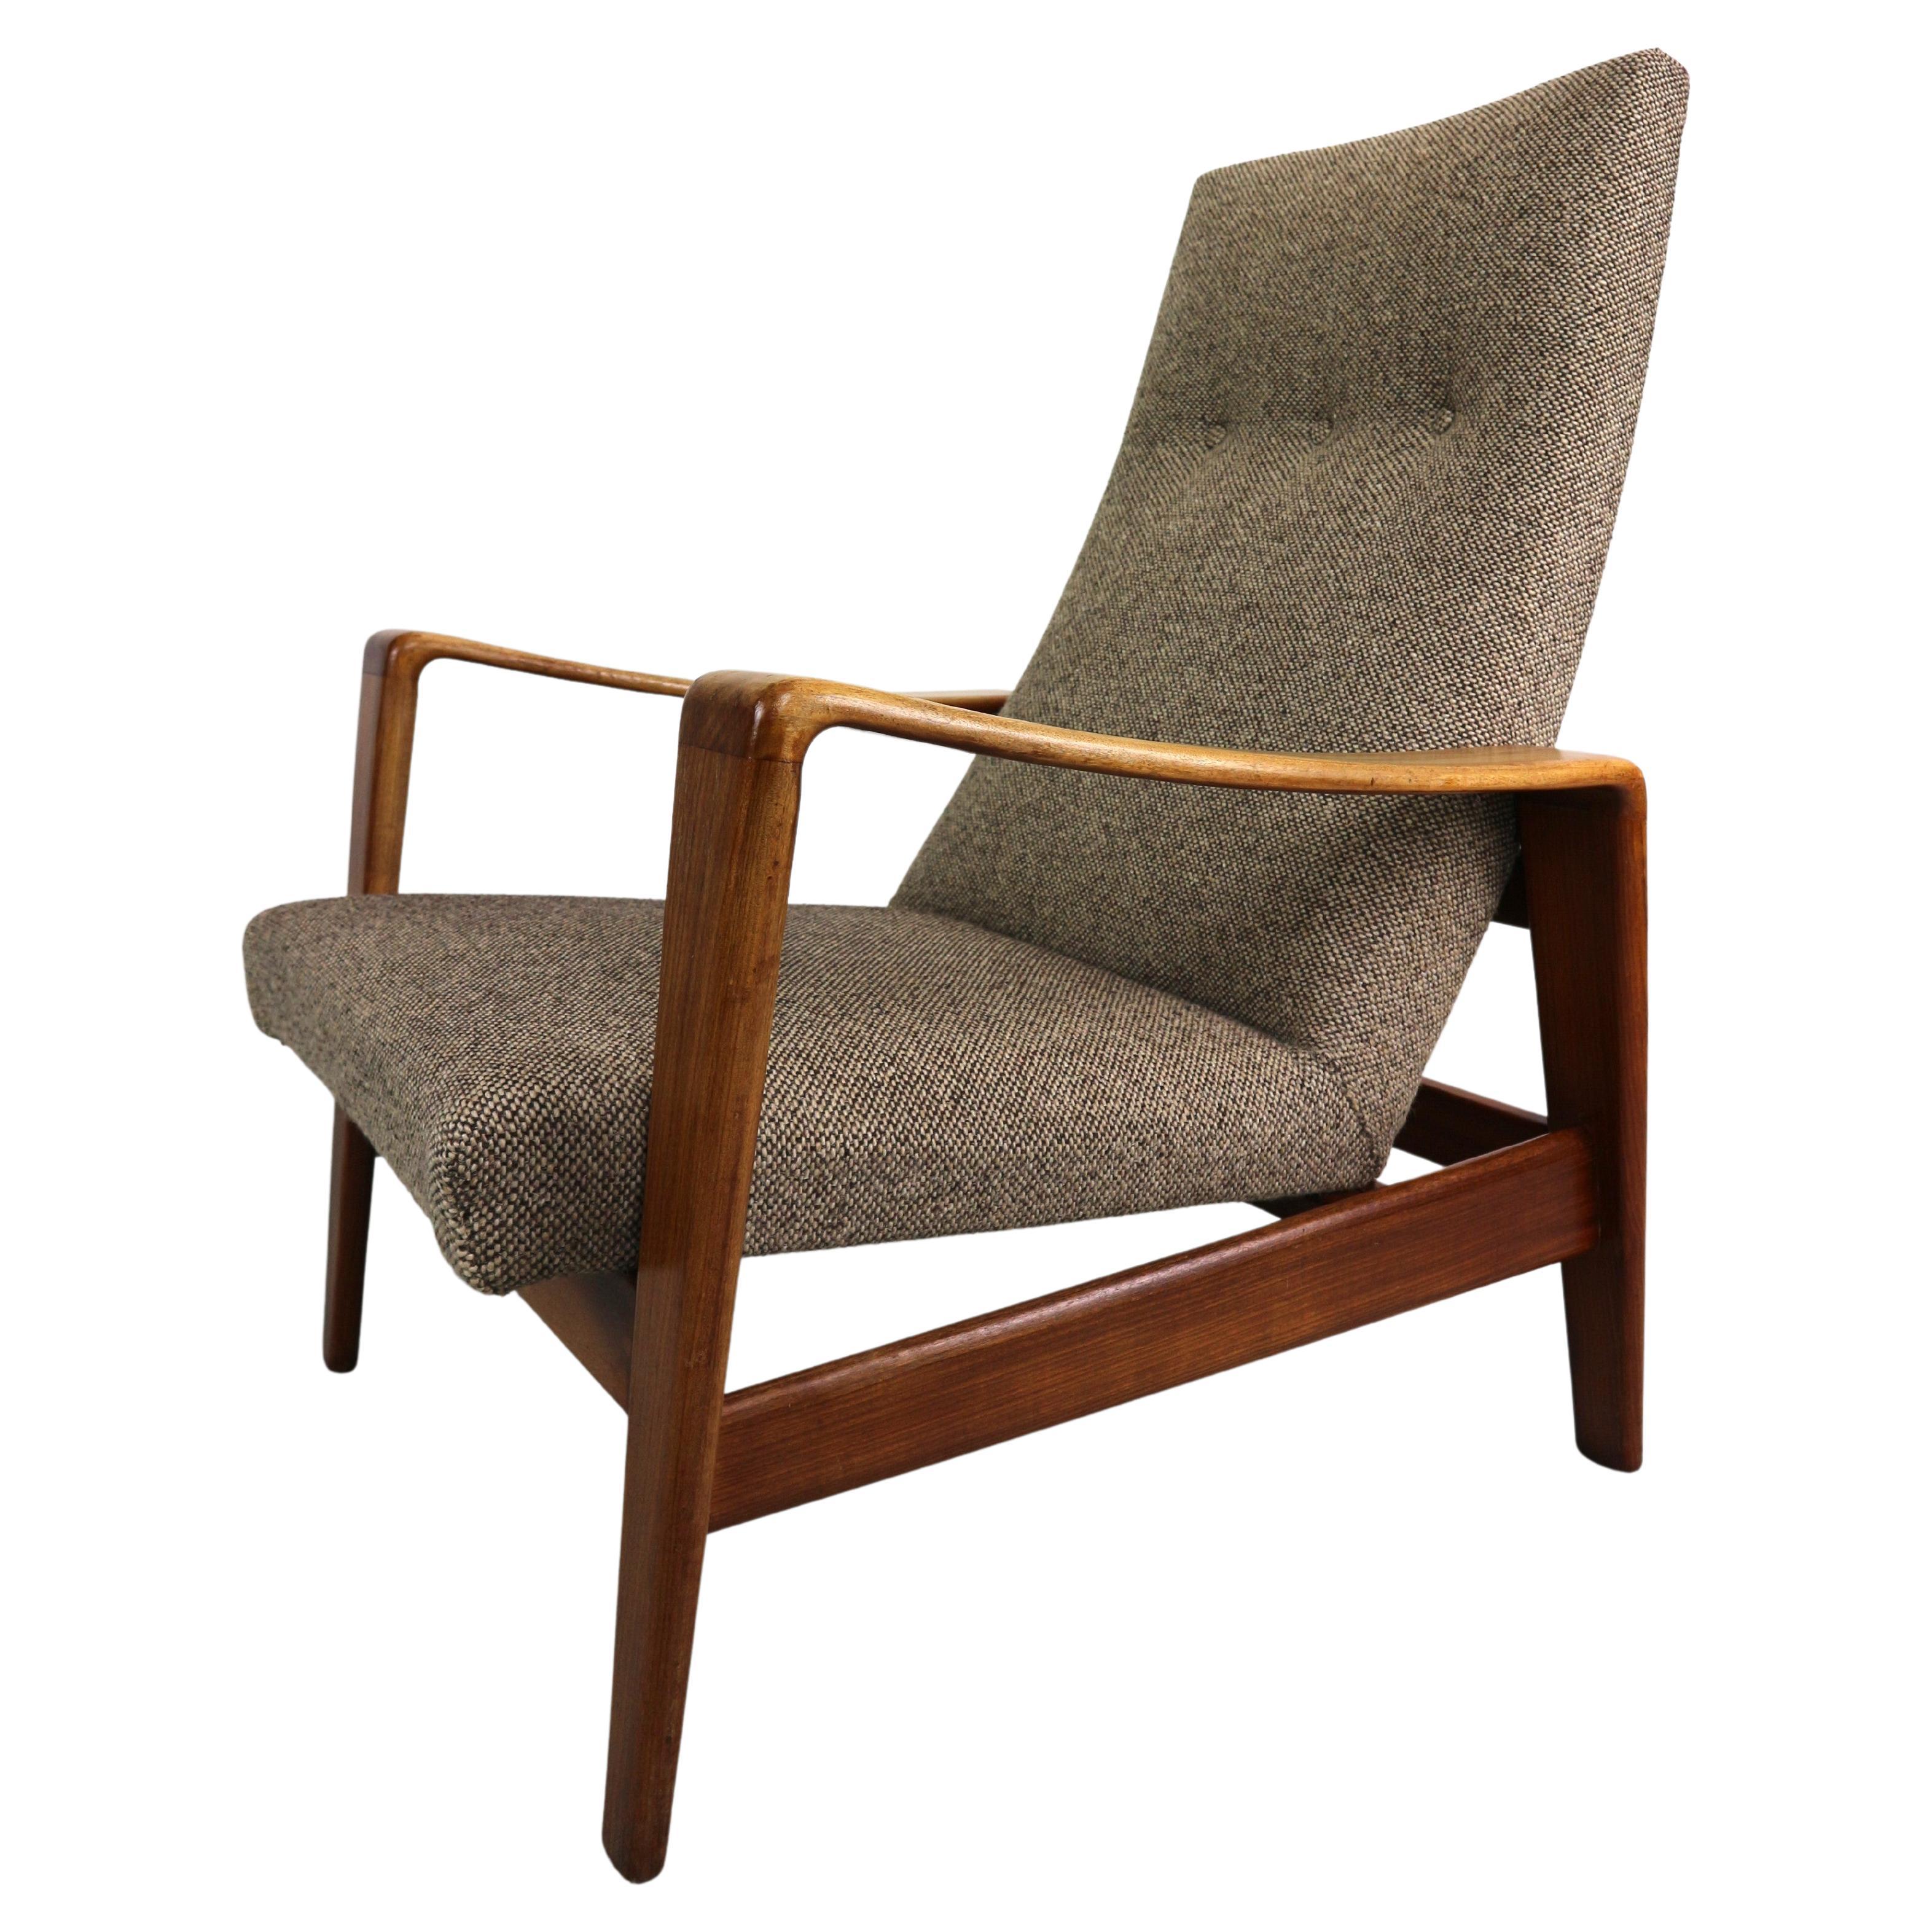 Lounge Chair by Arne Wahl Iversen for Komfort, 1960s